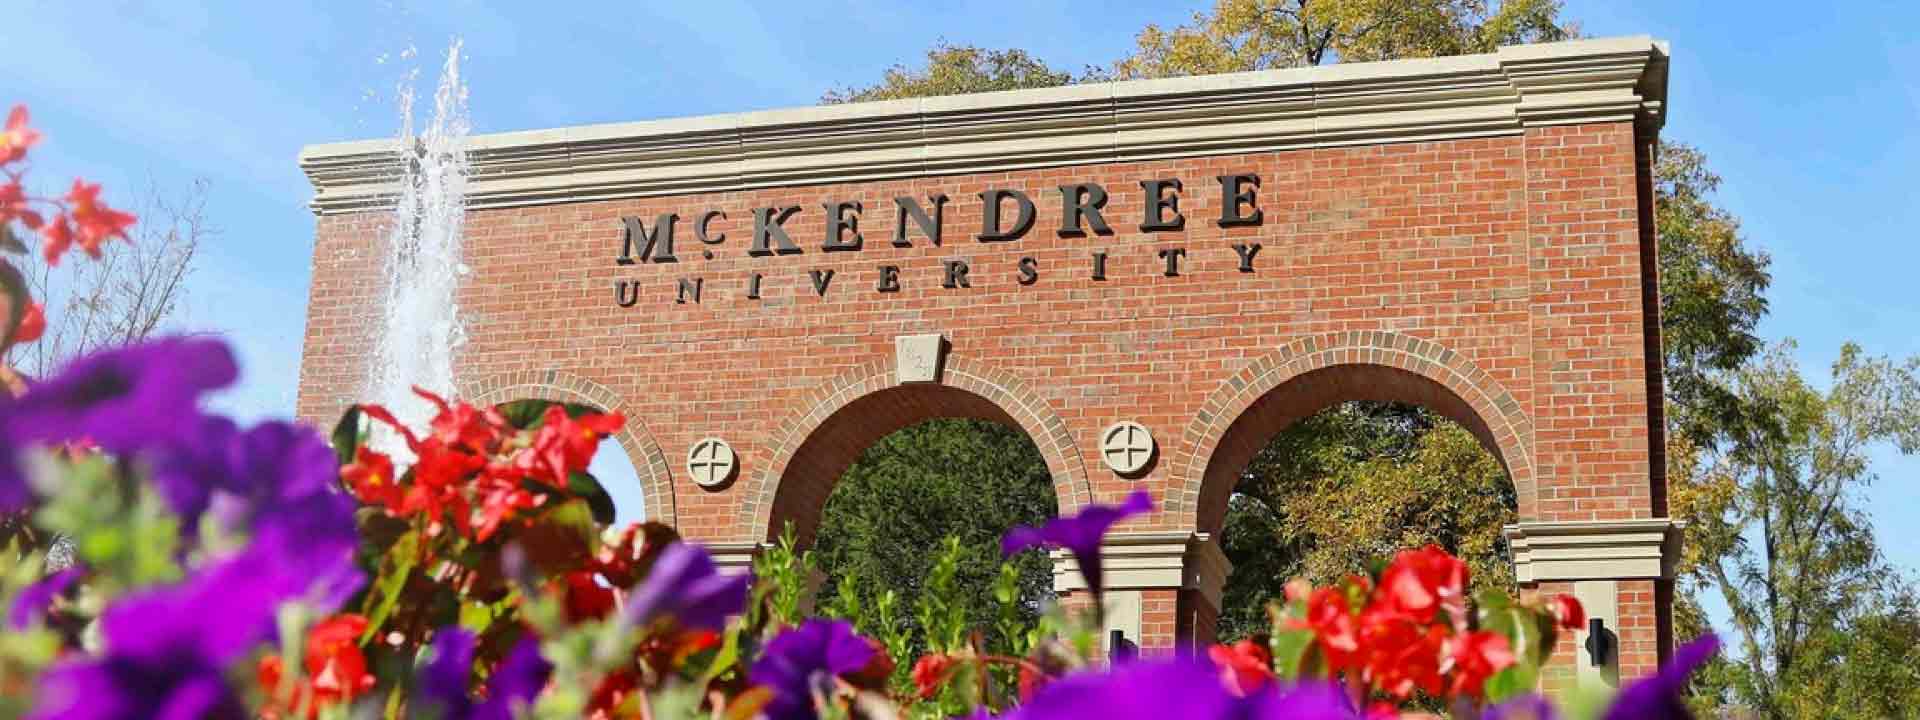 College and University Track & Field Teams McKendree University